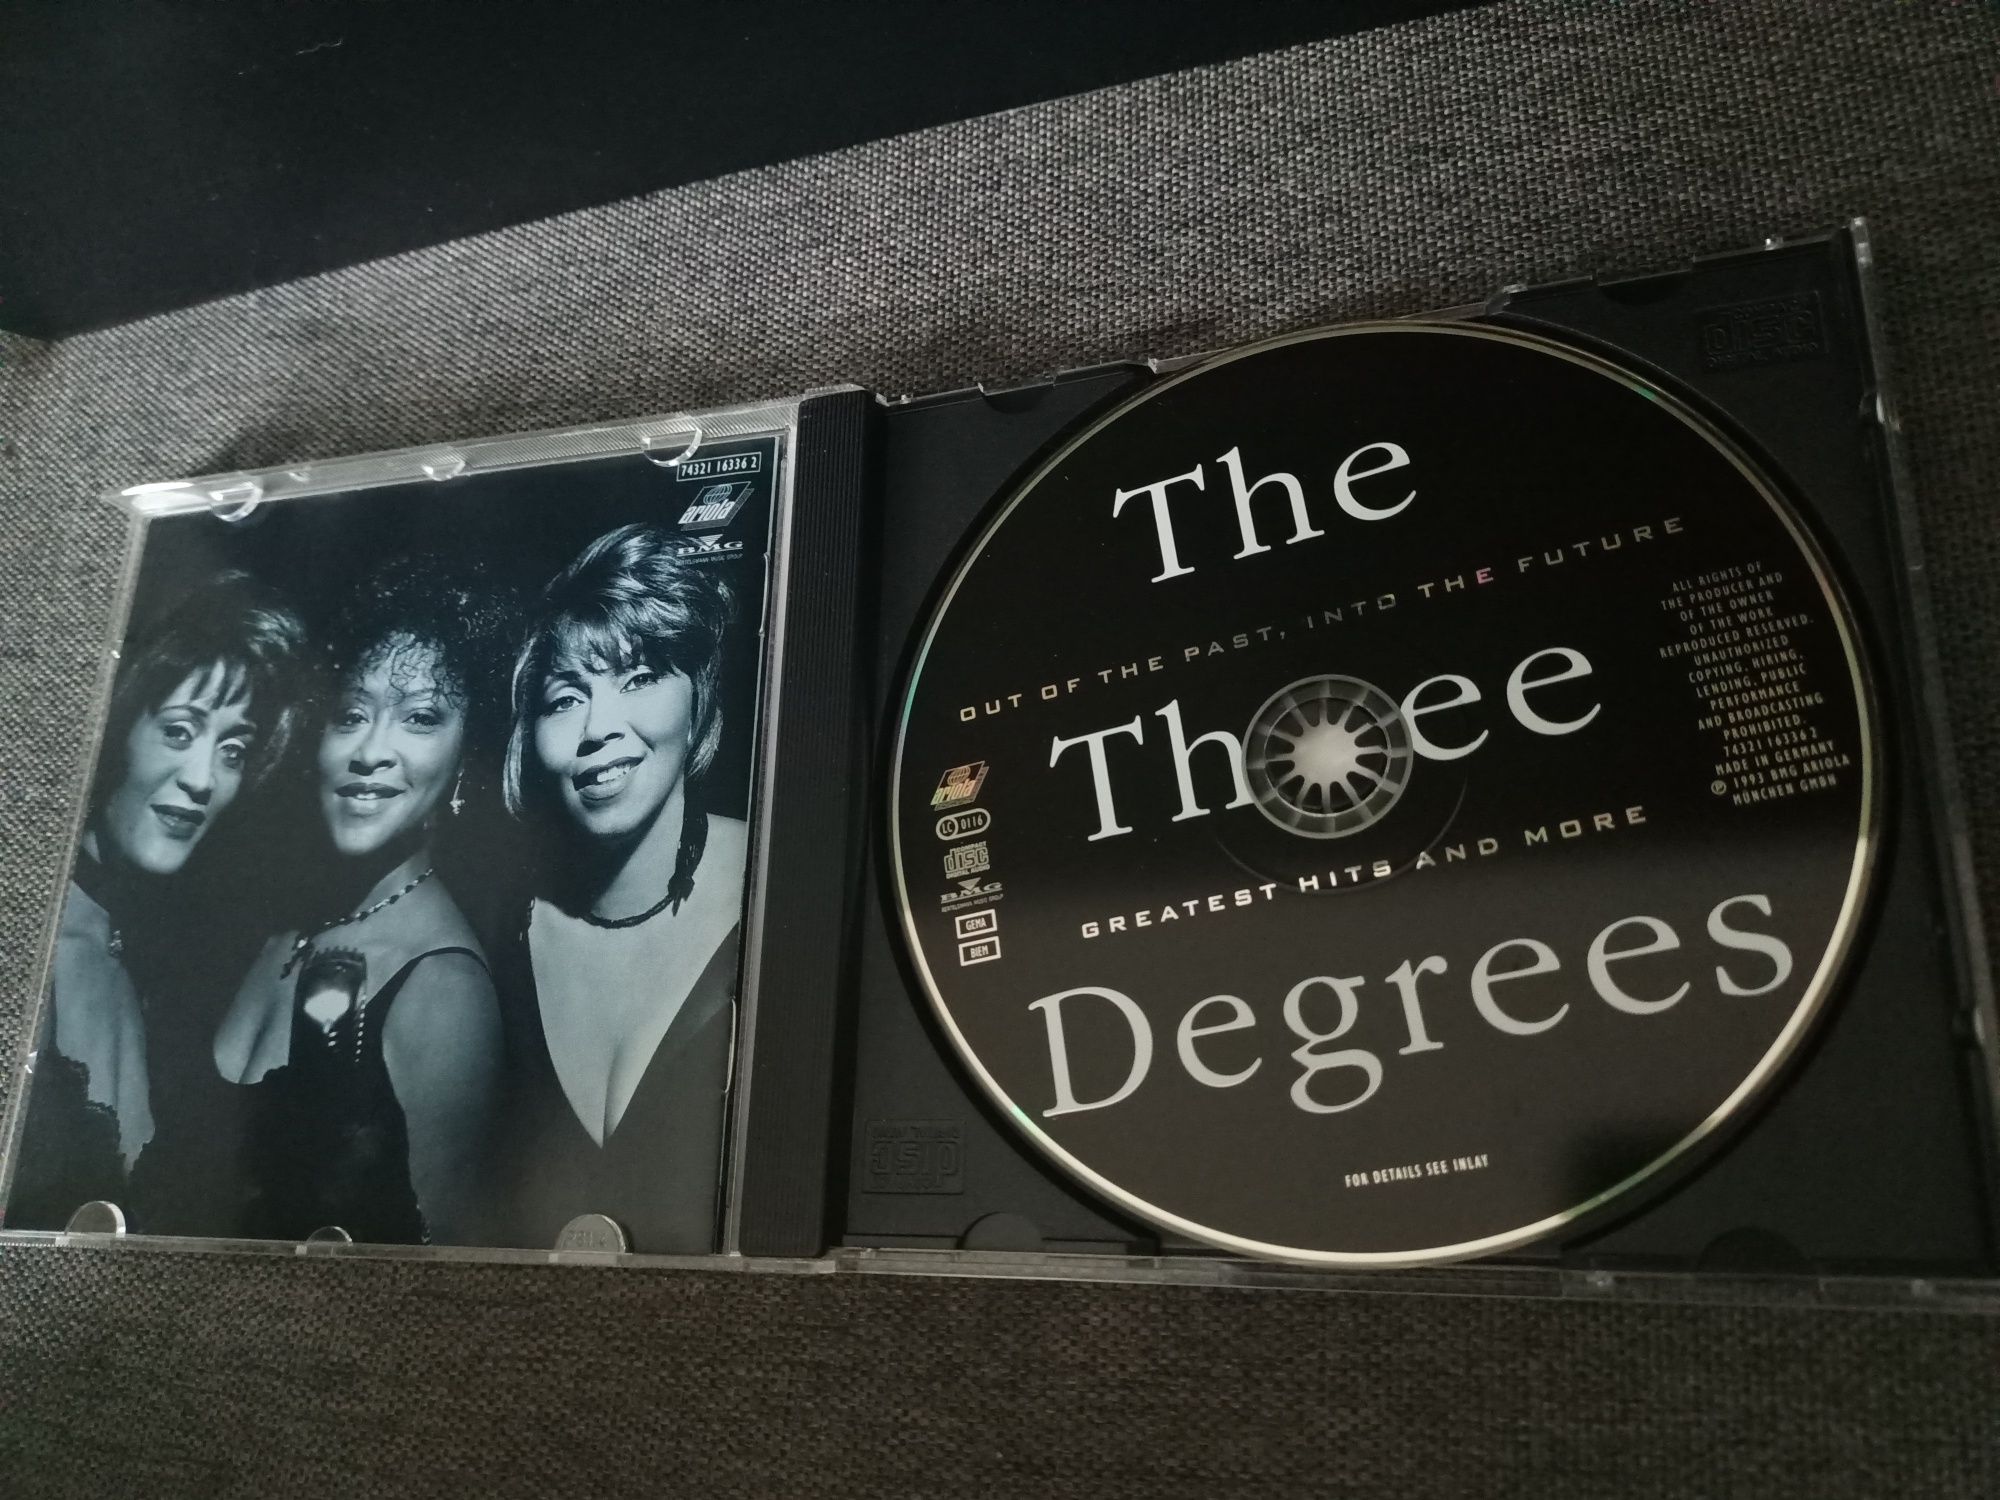 The Three Degrees - Out Of The Past, Into The Future (vg+)